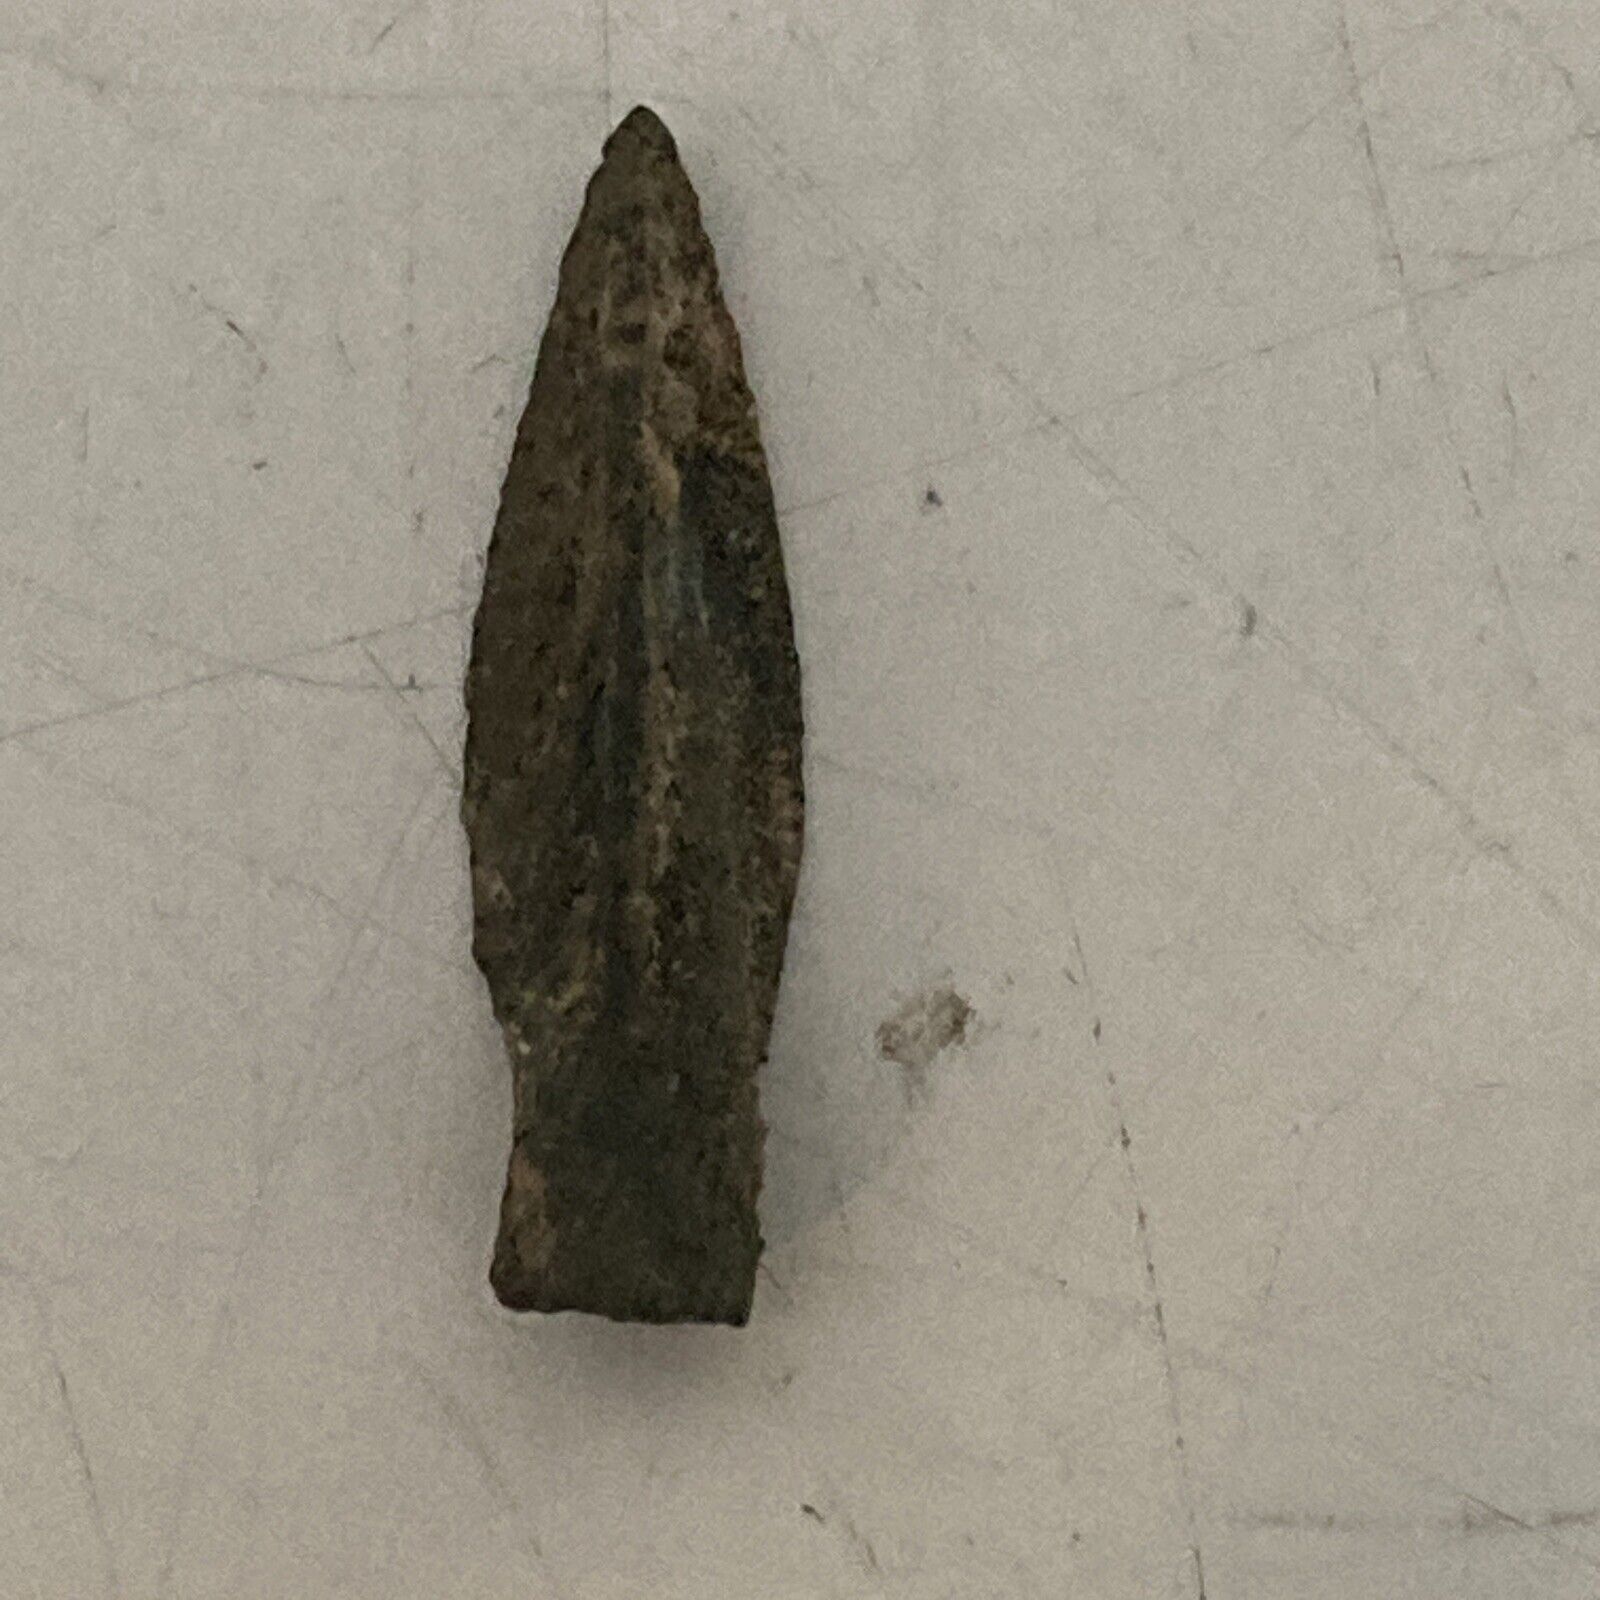 Authentic Ancient Roman Metal Arrowhead 1.25 Inches Long